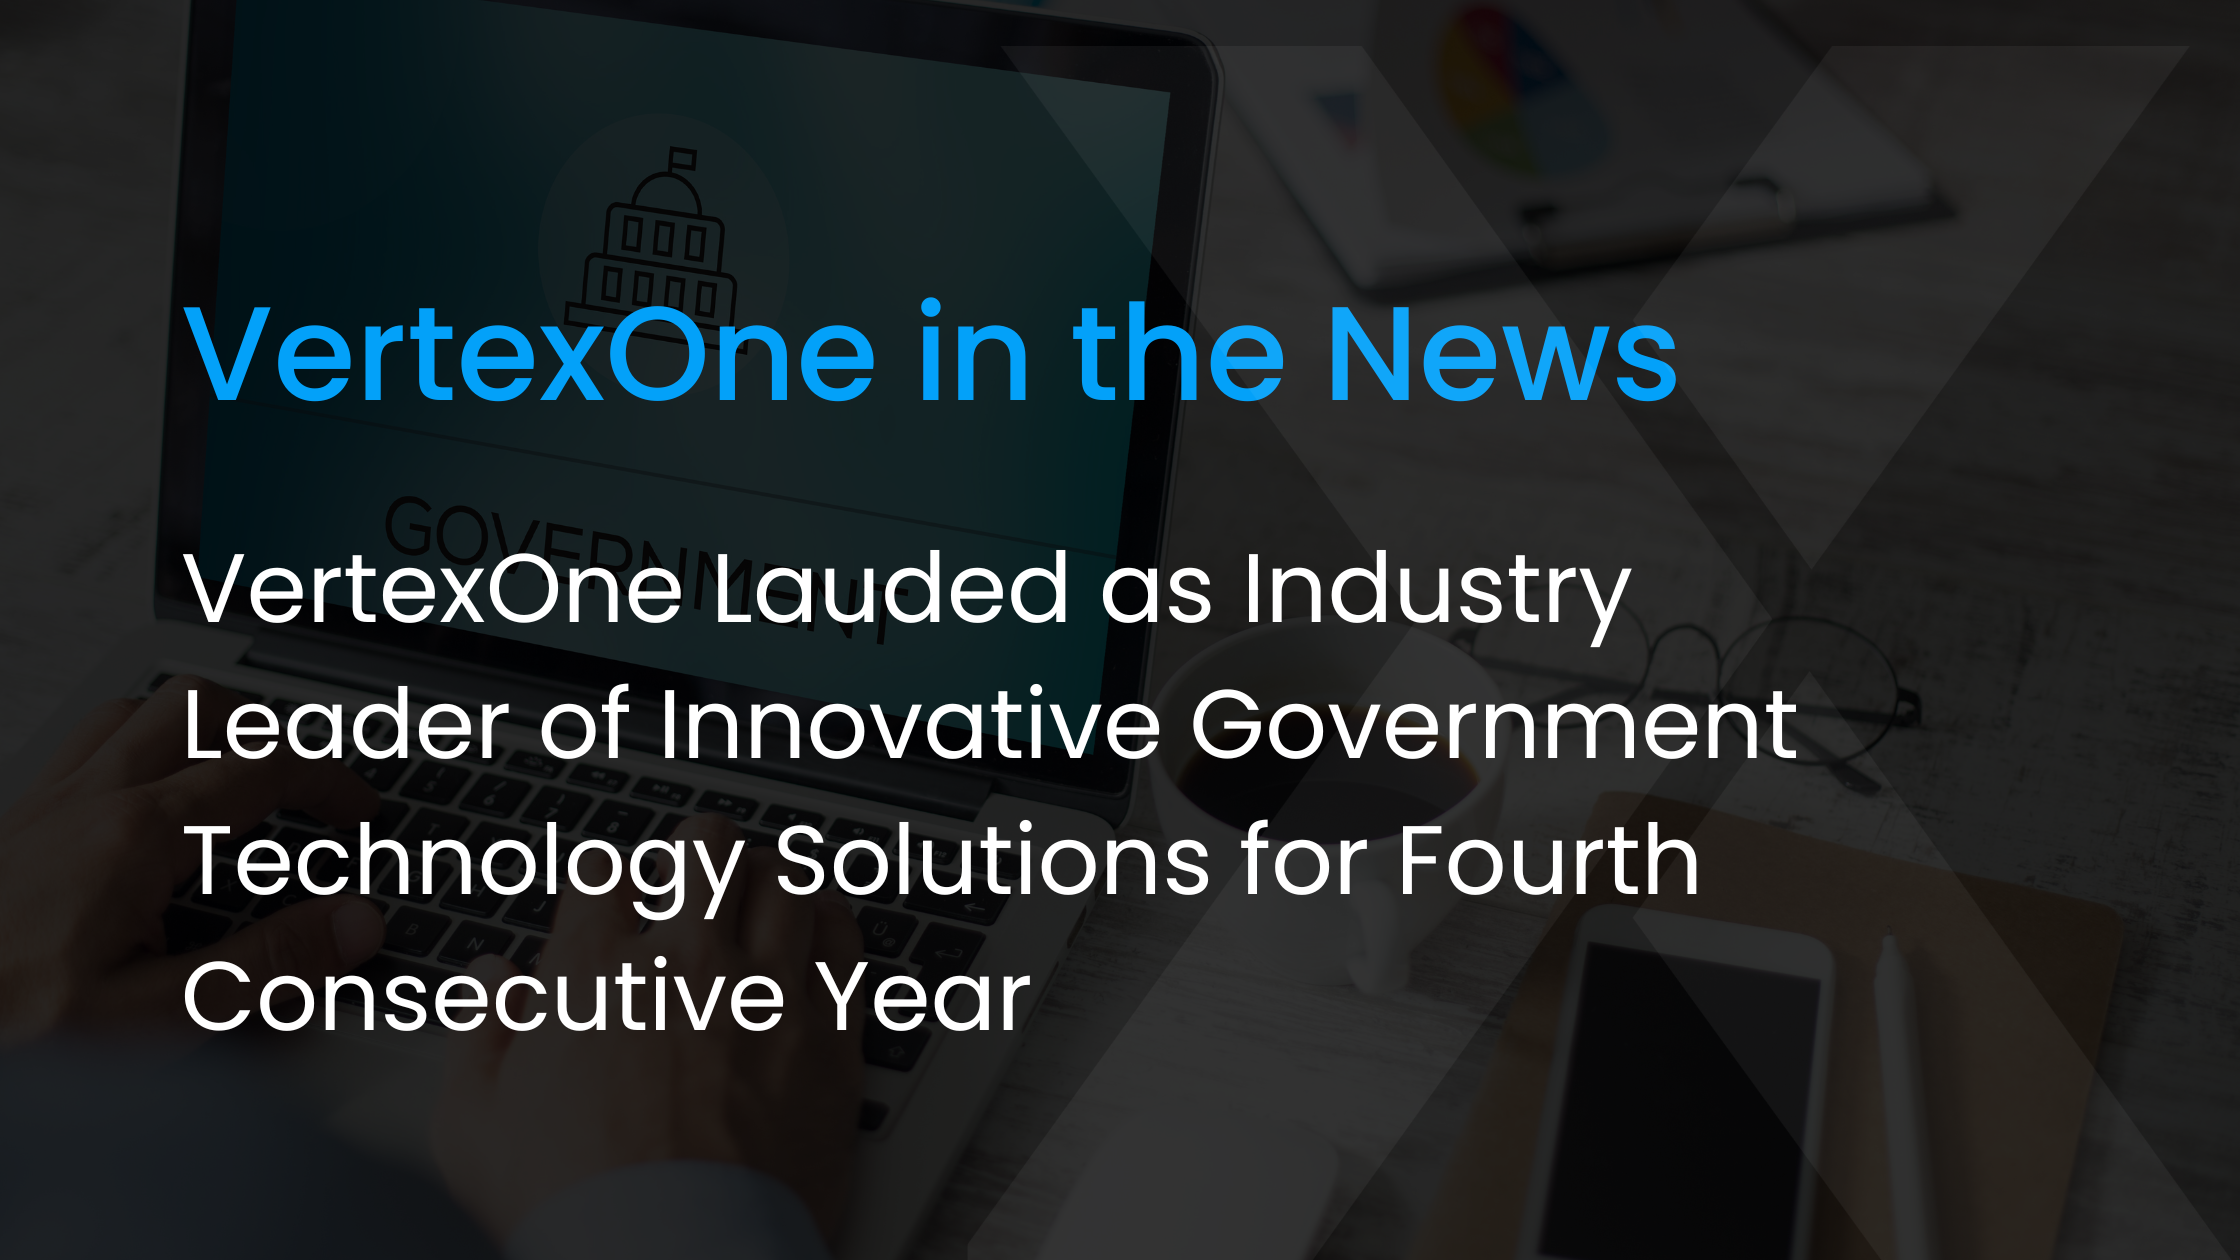 VertexOne Lauded as Industry Leader of Innovative Government Technology Solutions for Fourth Consecutive Year